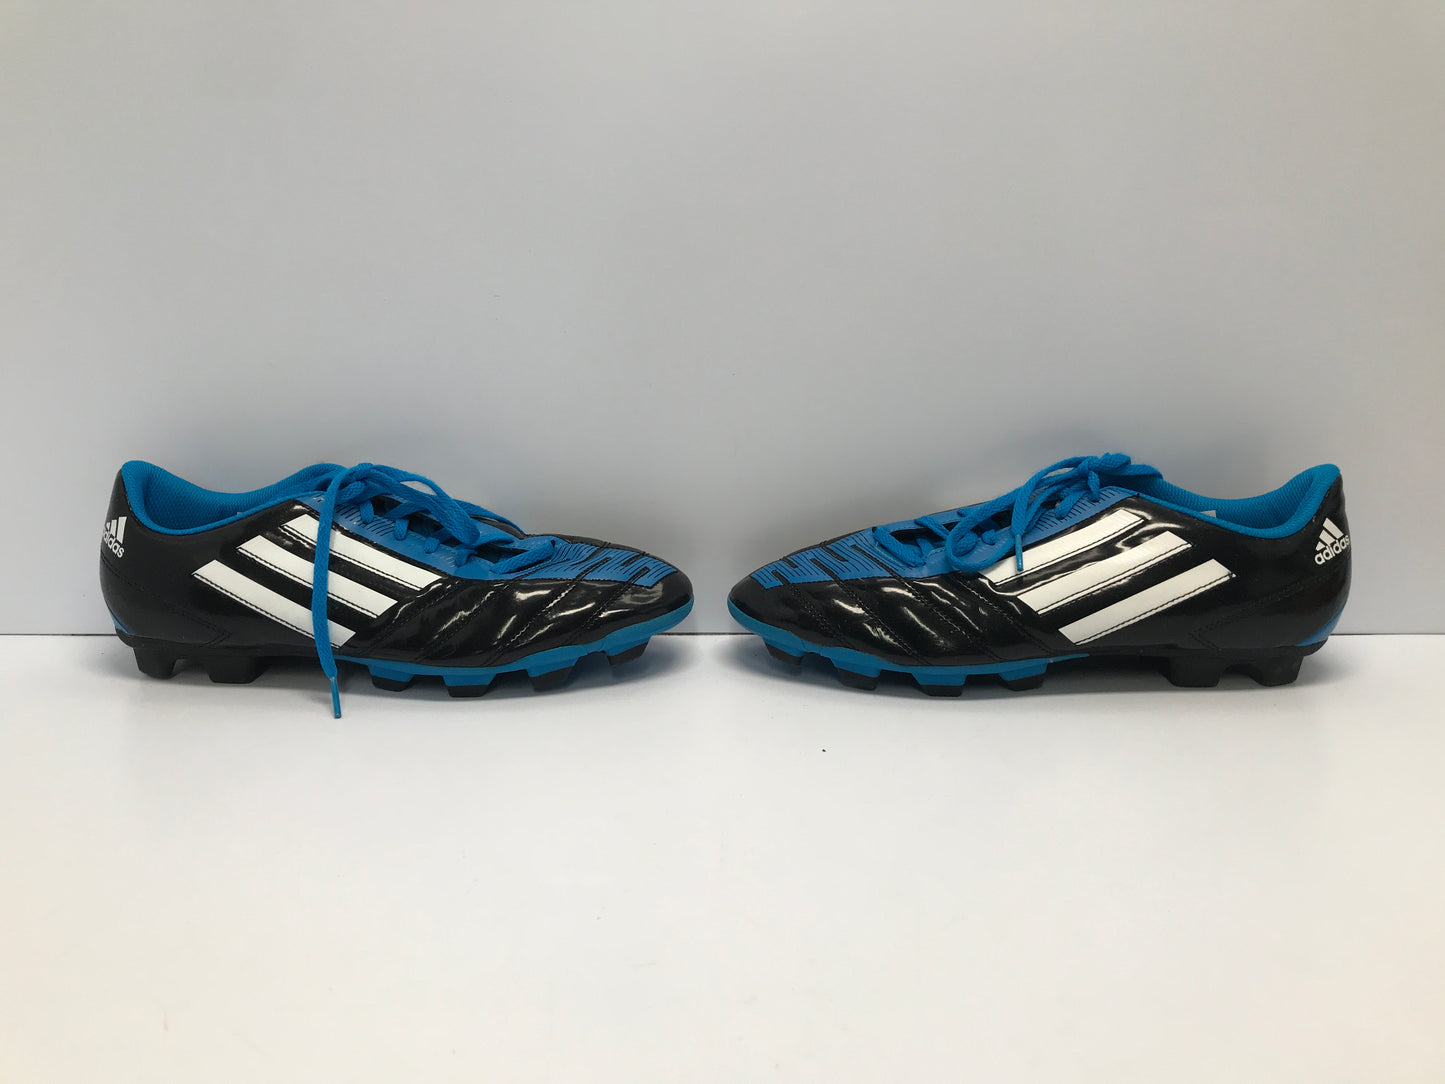 Soccer Shoes Cleats Men's Size 10 Adidas Blue Black Like New